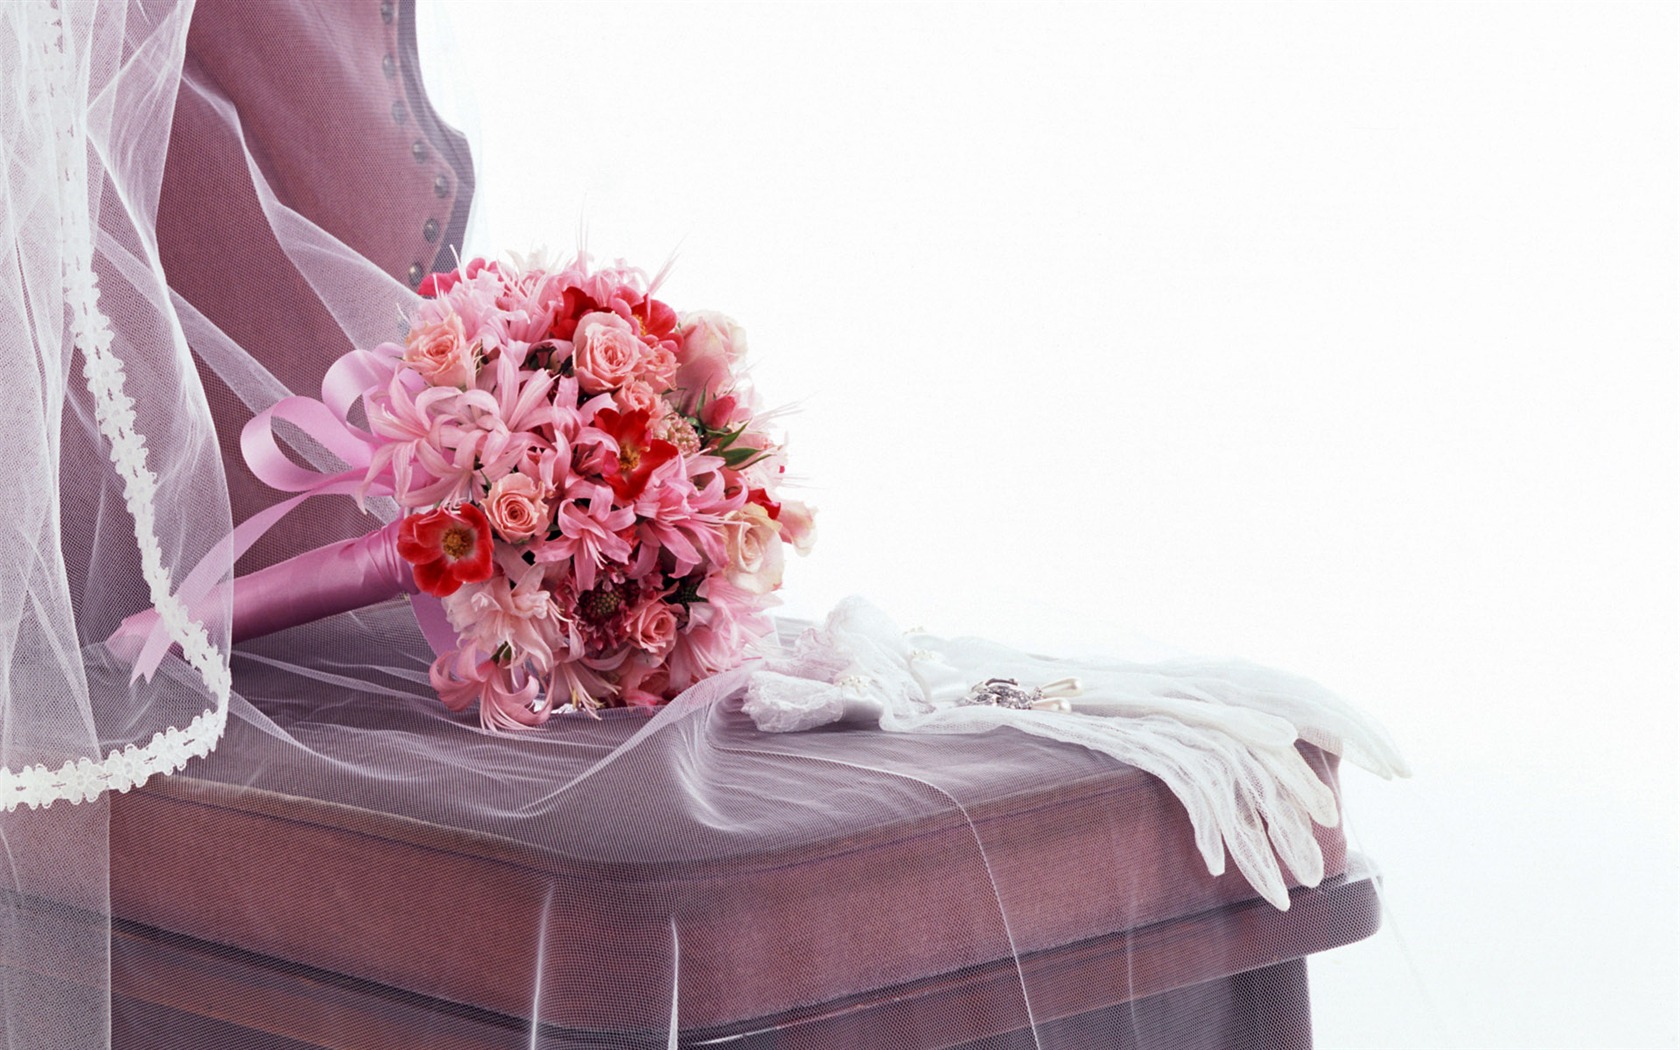 Weddings and Flowers wallpaper (1) #8 - 1680x1050